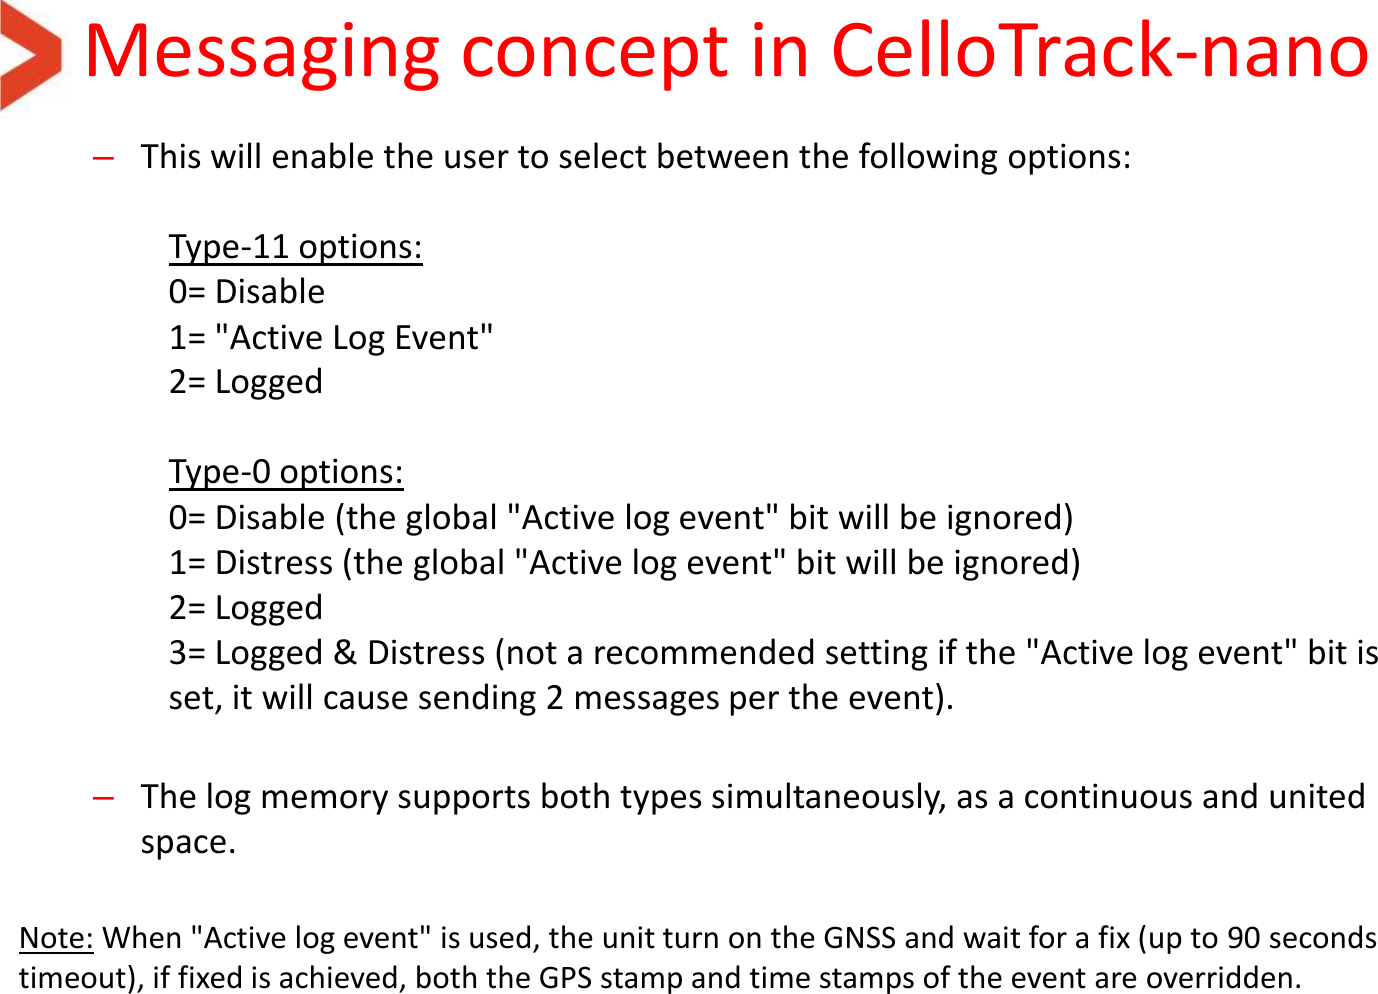 Messaging concept in CelloTrack-nano  –This will enable the user to select between the following options:   Type-11 options: 0= Disable 1= &quot;Active Log Event&quot; 2= Logged   Type-0 options: 0= Disable (the global &quot;Active log event&quot; bit will be ignored) 1= Distress (the global &quot;Active log event&quot; bit will be ignored) 2= Logged 3= Logged &amp; Distress (not a recommended setting if the &quot;Active log event&quot; bit is set, it will cause sending 2 messages per the event).   –The log memory supports both types simultaneously, as a continuous and united space.   Note: When &quot;Active log event&quot; is used, the unit turn on the GNSS and wait for a fix (up to 90 seconds timeout), if fixed is achieved, both the GPS stamp and time stamps of the event are overridden.  